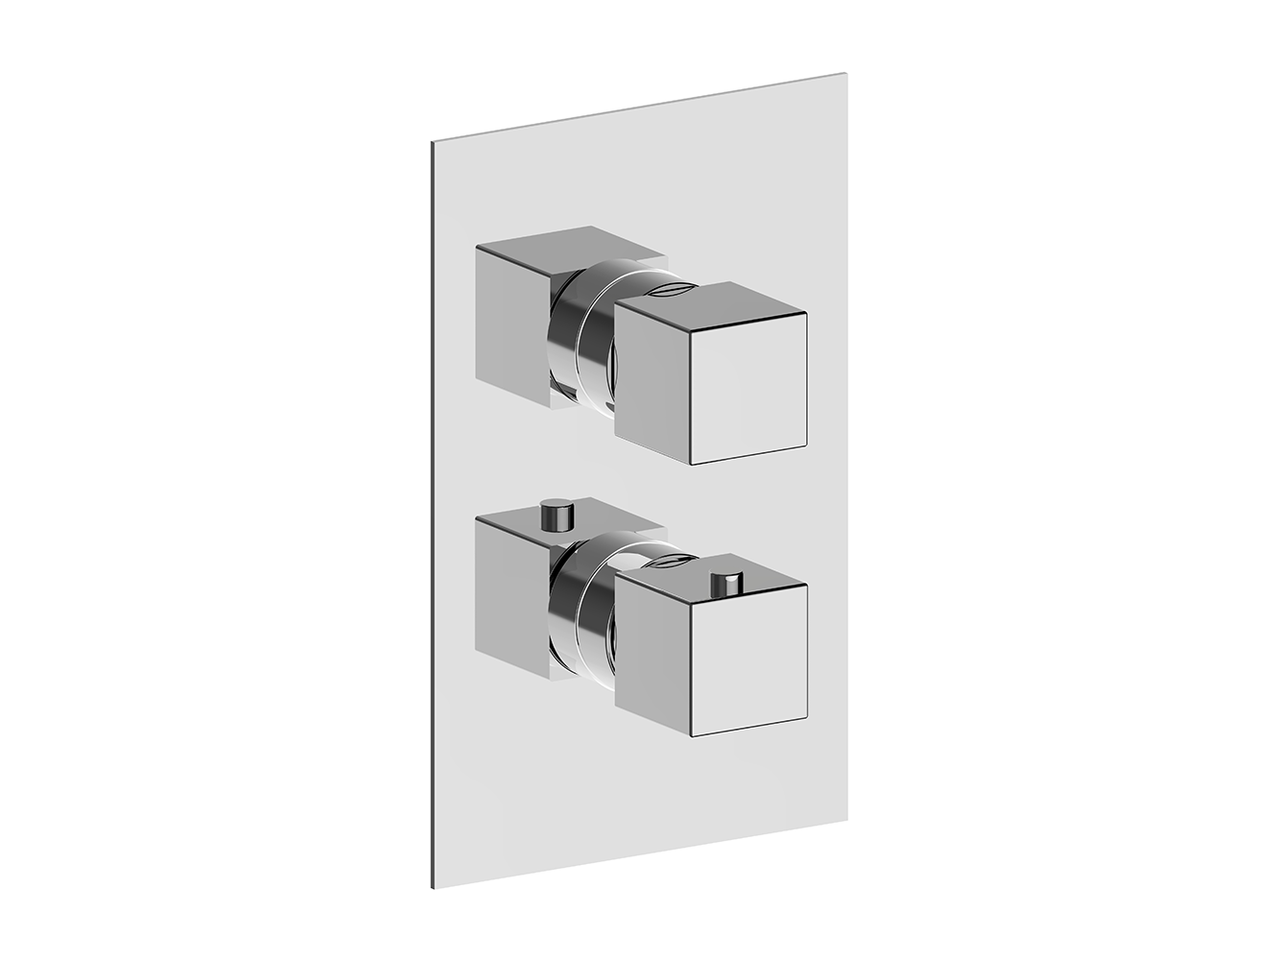 Exposed part for Thermostatic One Box Valve ONE BOX_WE0BT030 - v1